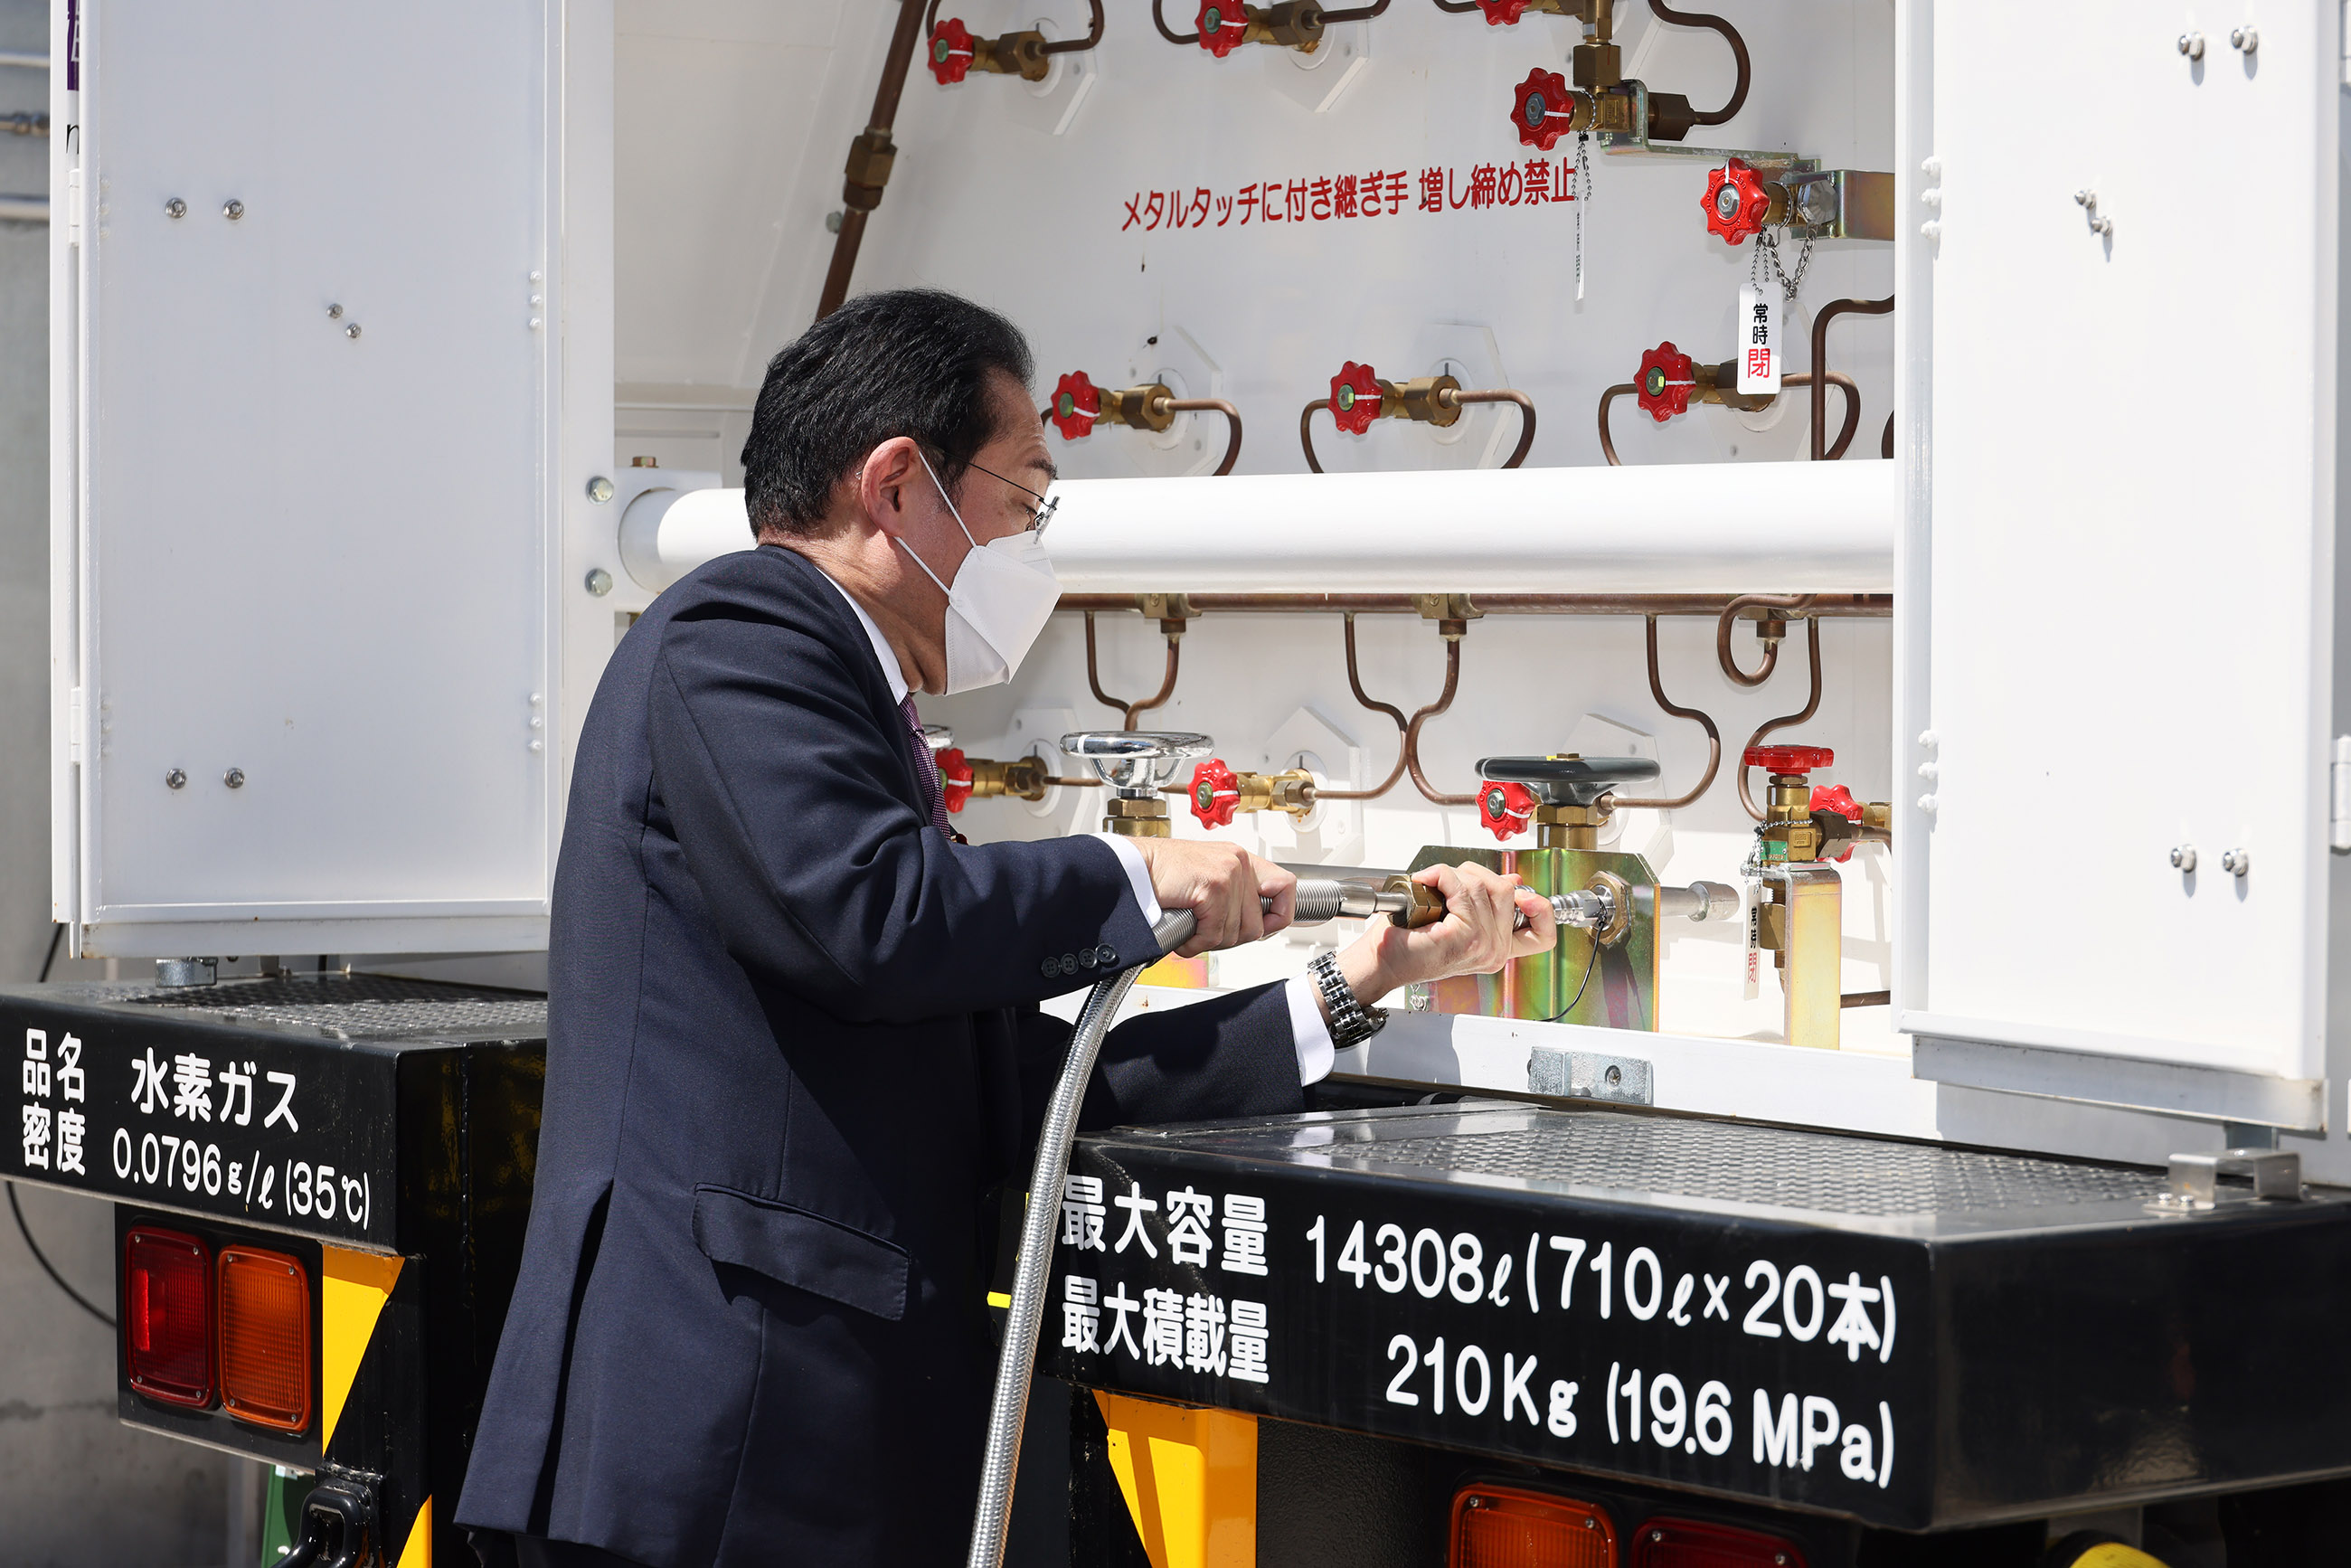 Photograph of the Prime Minister visiting the Komekurayama Electric Power Storage Technology Research Site (4)